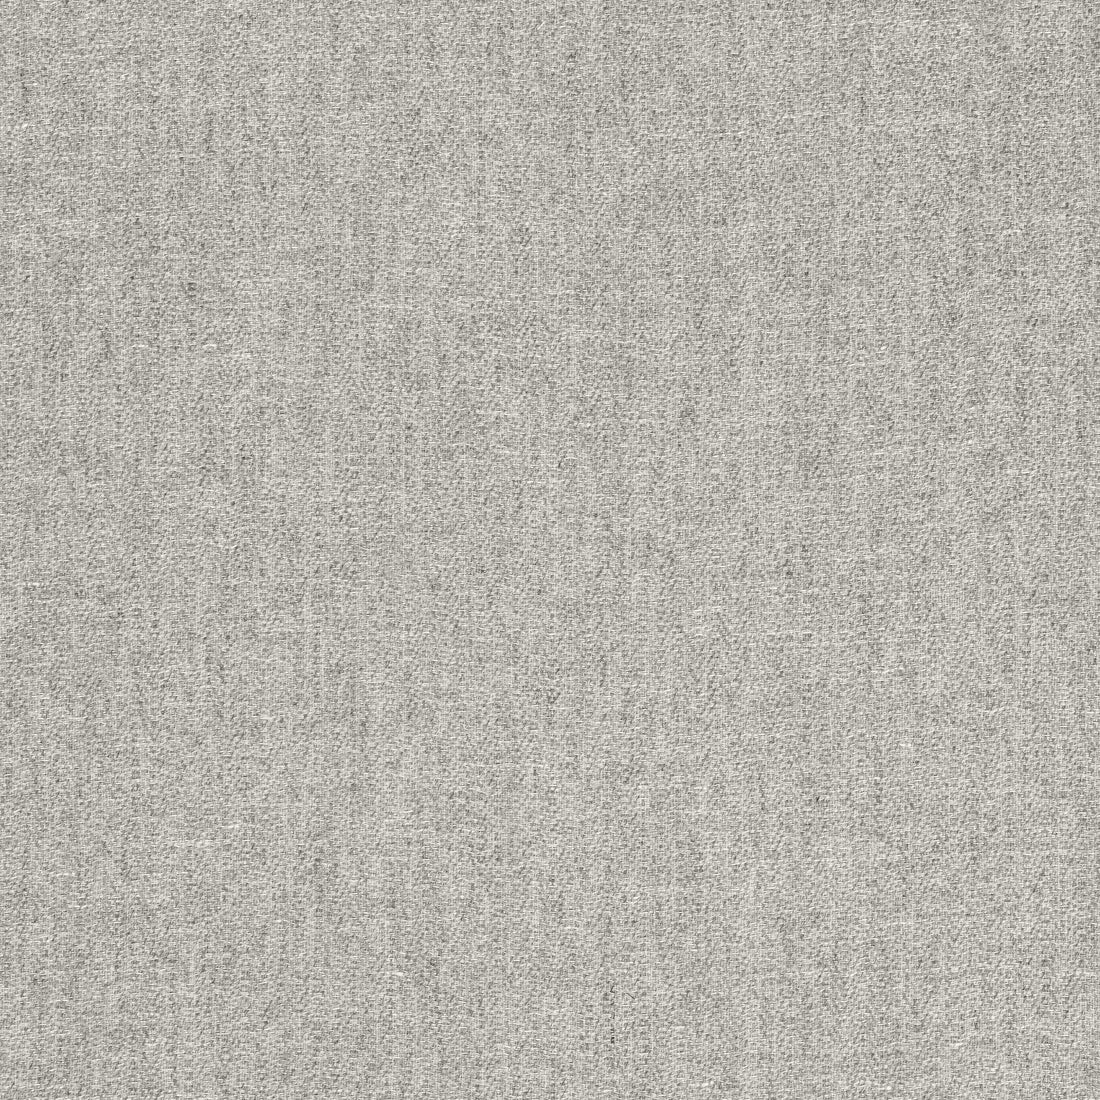 Laramie fabric in smoke color - pattern number FWW8208 - by Thibaut in the Aura collection